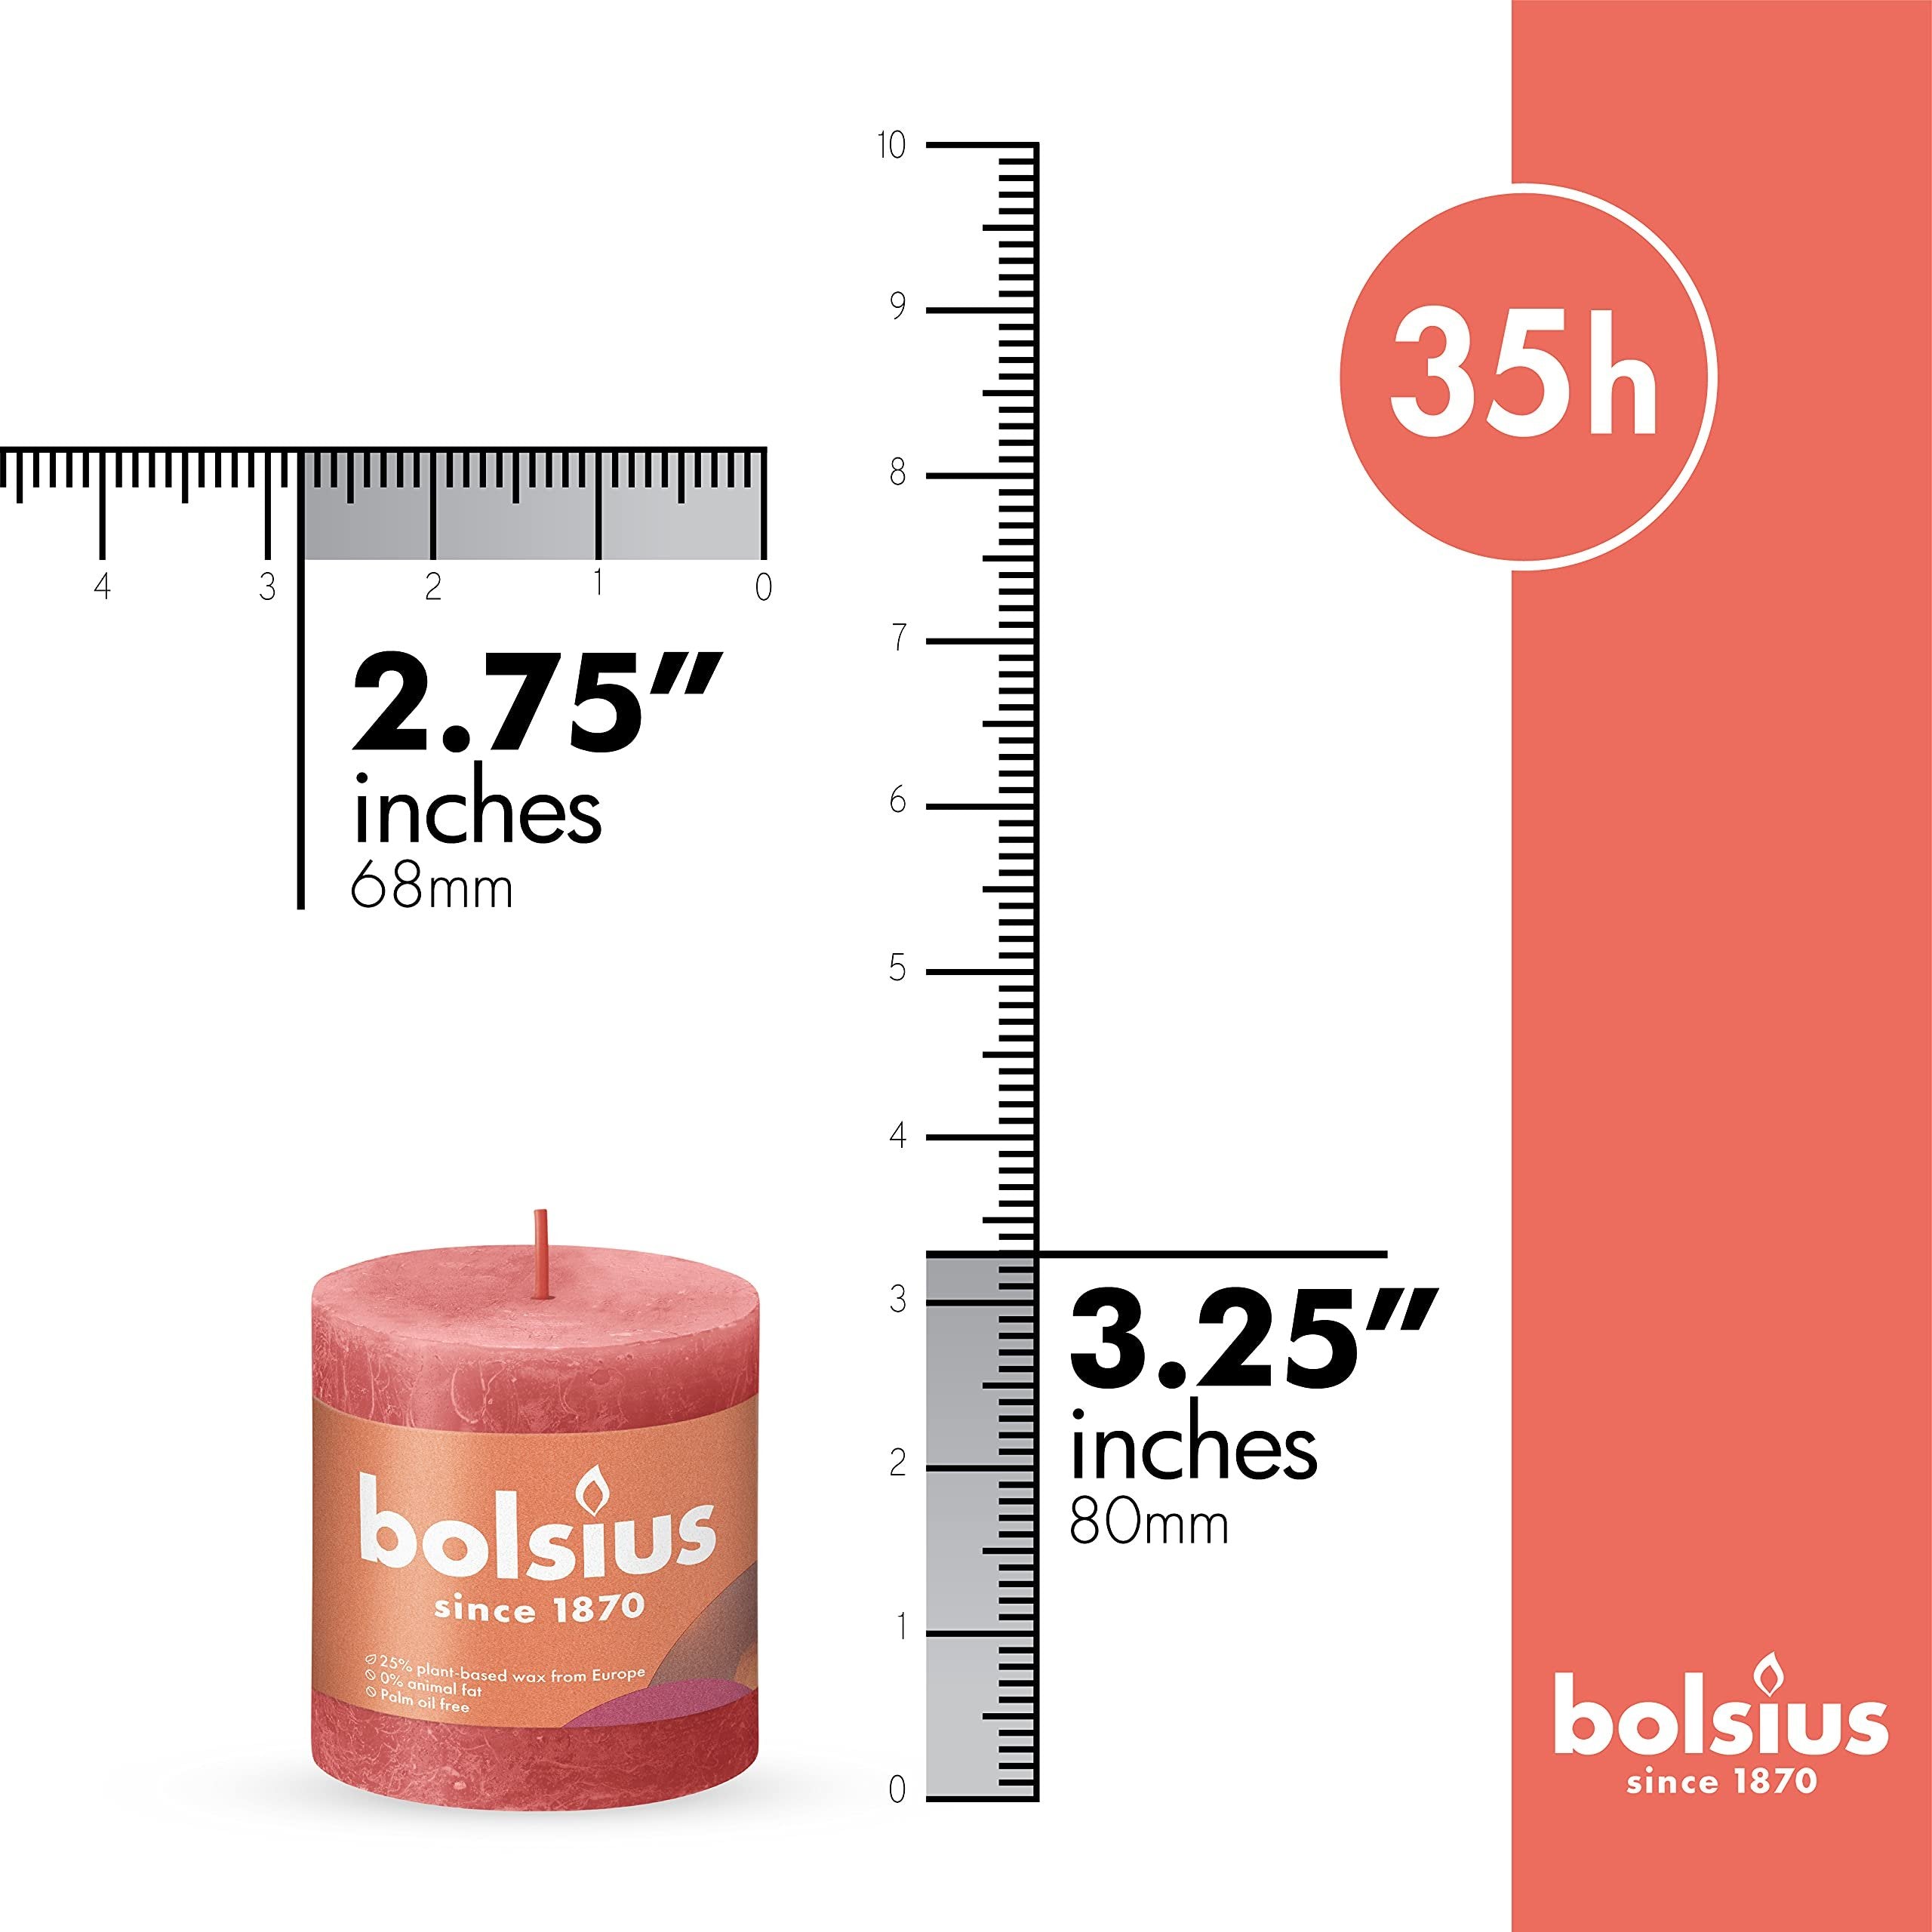 BOLSIUS Pillar Candles - Premium European Quality - Natural Eco-Friendly Plant-Based Wax - Unscented Dripless Smokeless